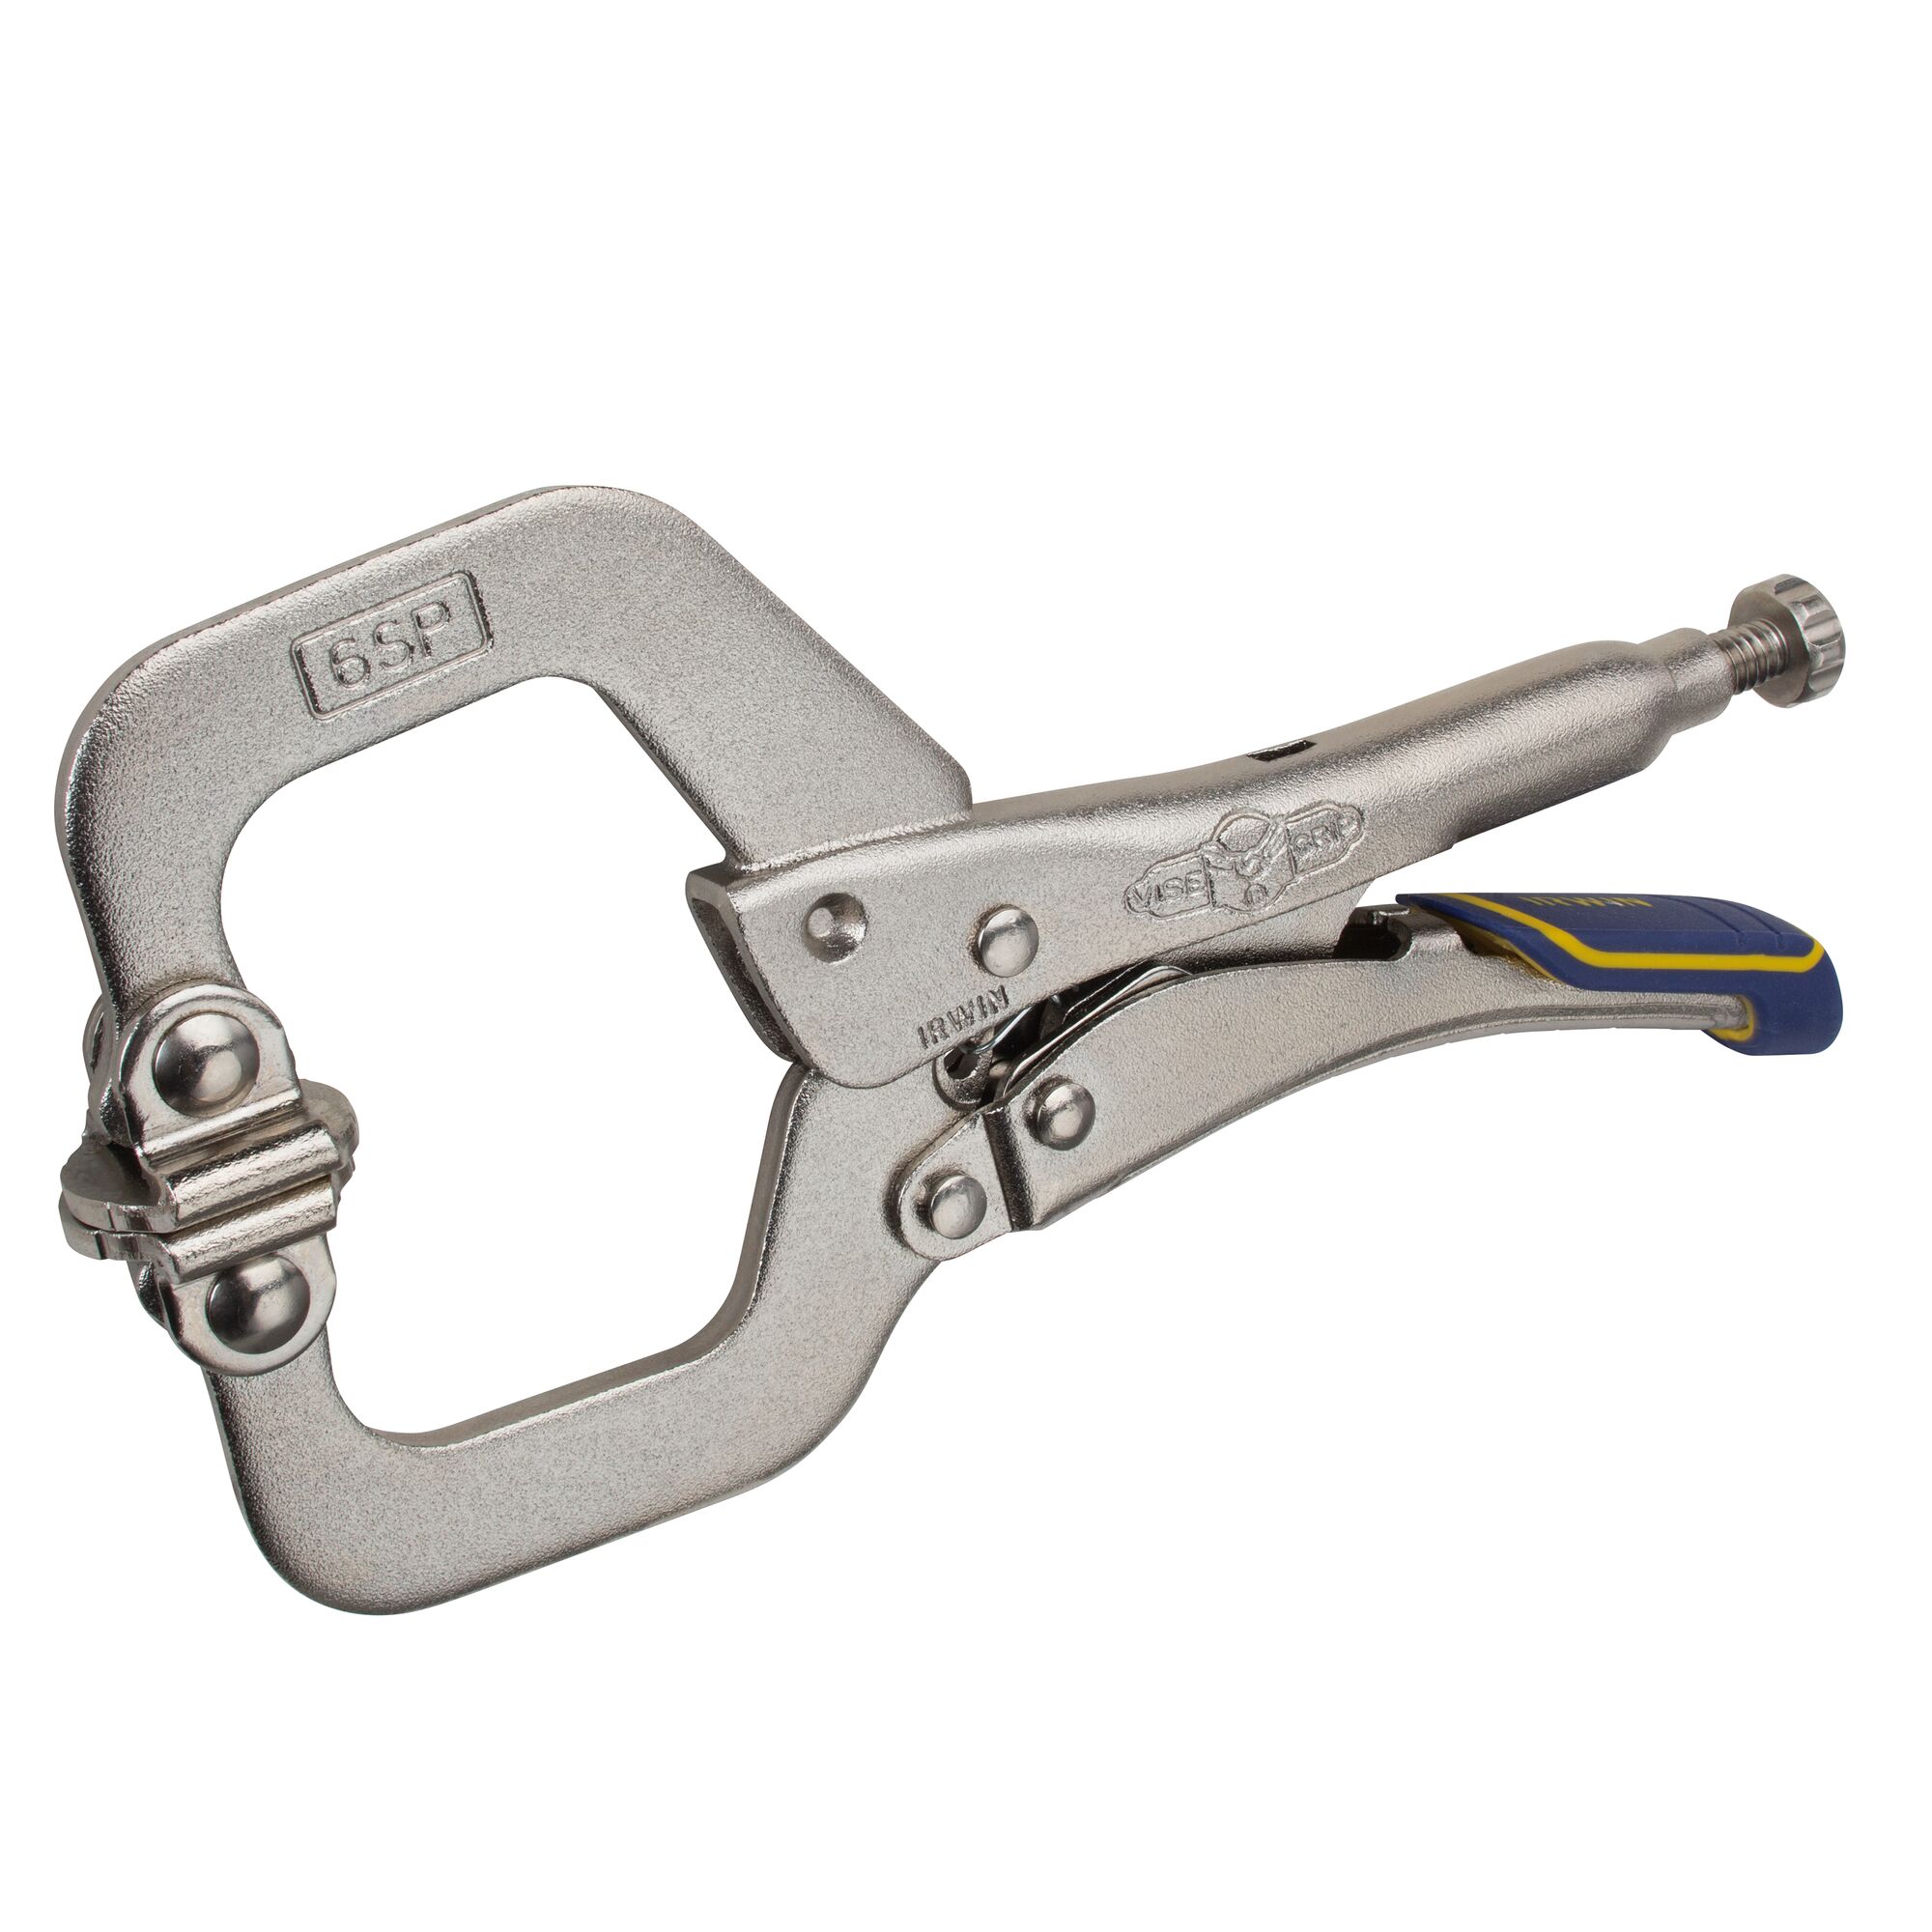 VISE-GRIP® Fast Release 6SP Locking C-Clamp With Swivel Pads | IRWIN